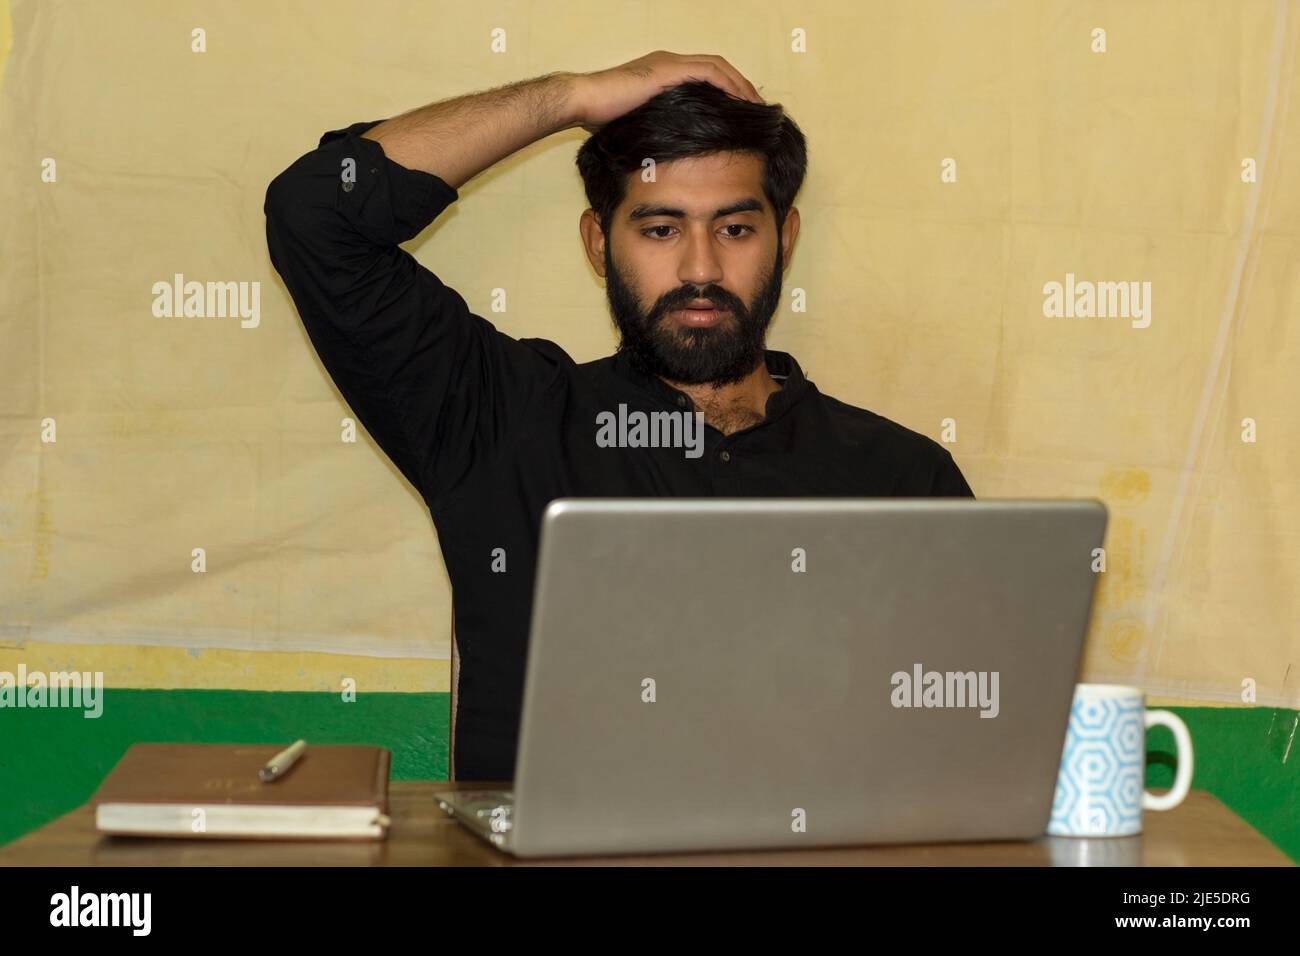 A bearded Indian man wearing black formal shirt, sitting on a chair and giving shocked expression looking at laptop screen. Diary and coffee mug on ta Stock Photo